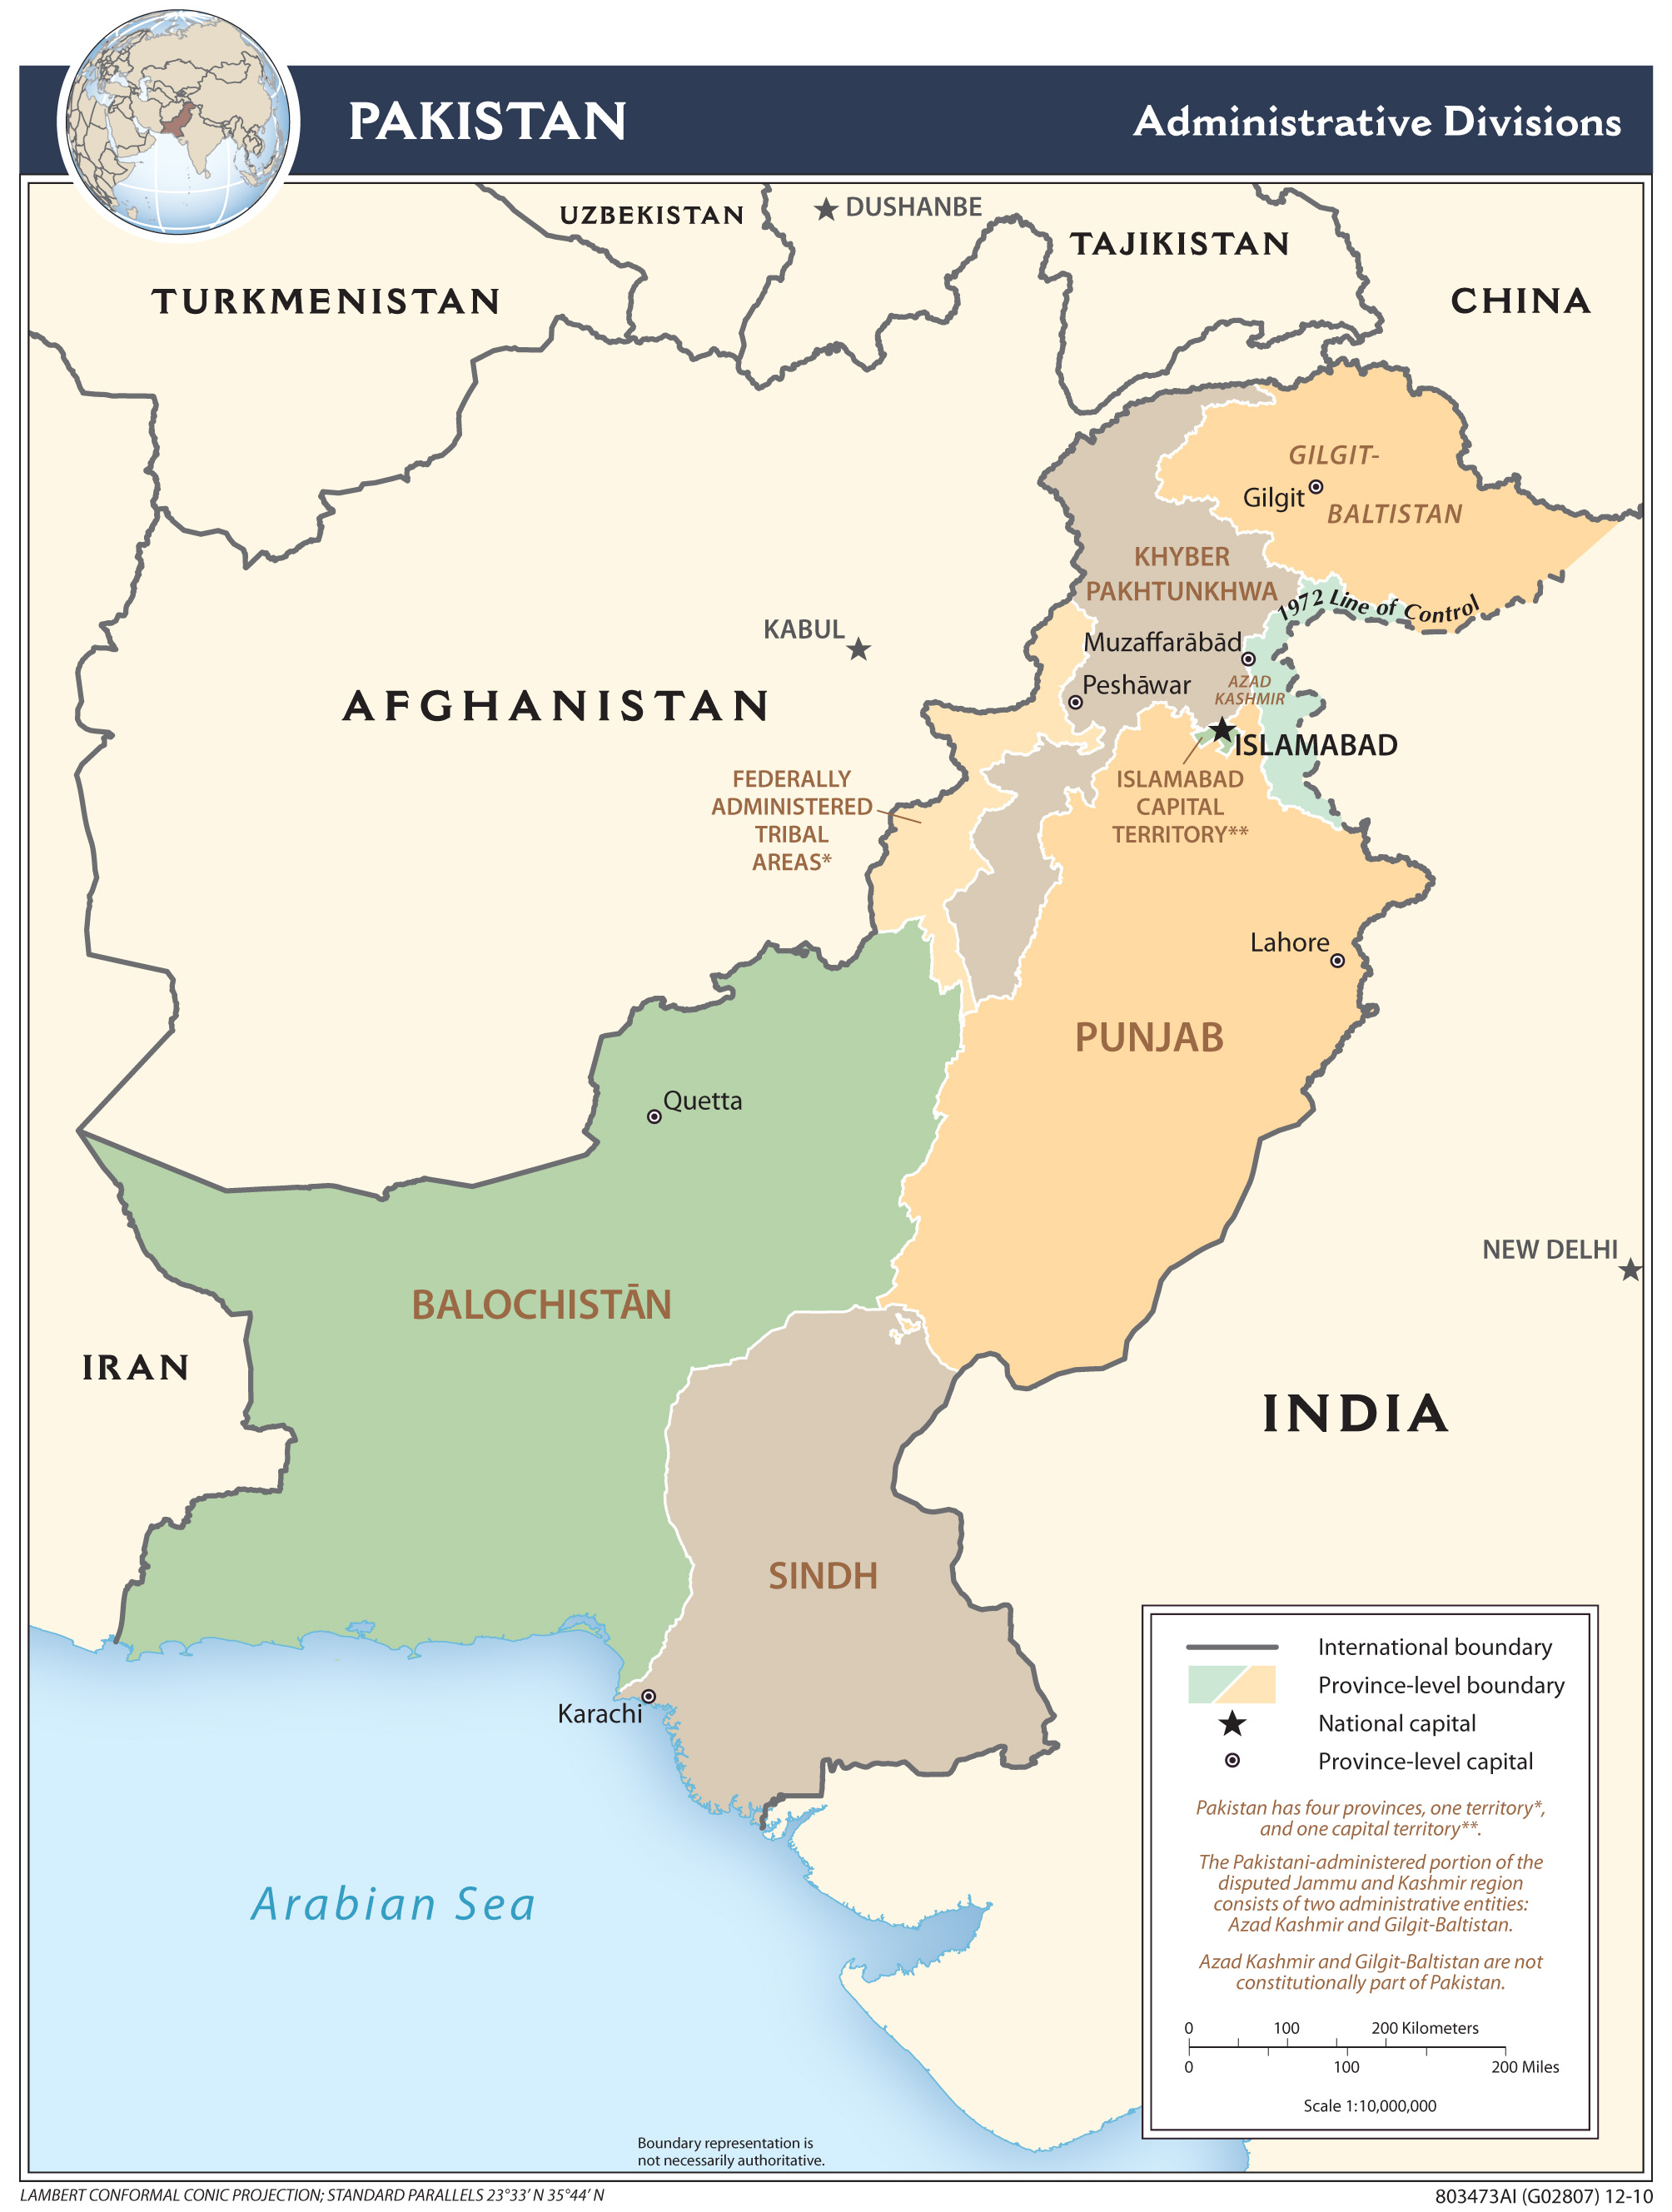 Pakistan Maps - Perry-Castañeda Map Collection - UT Library Online